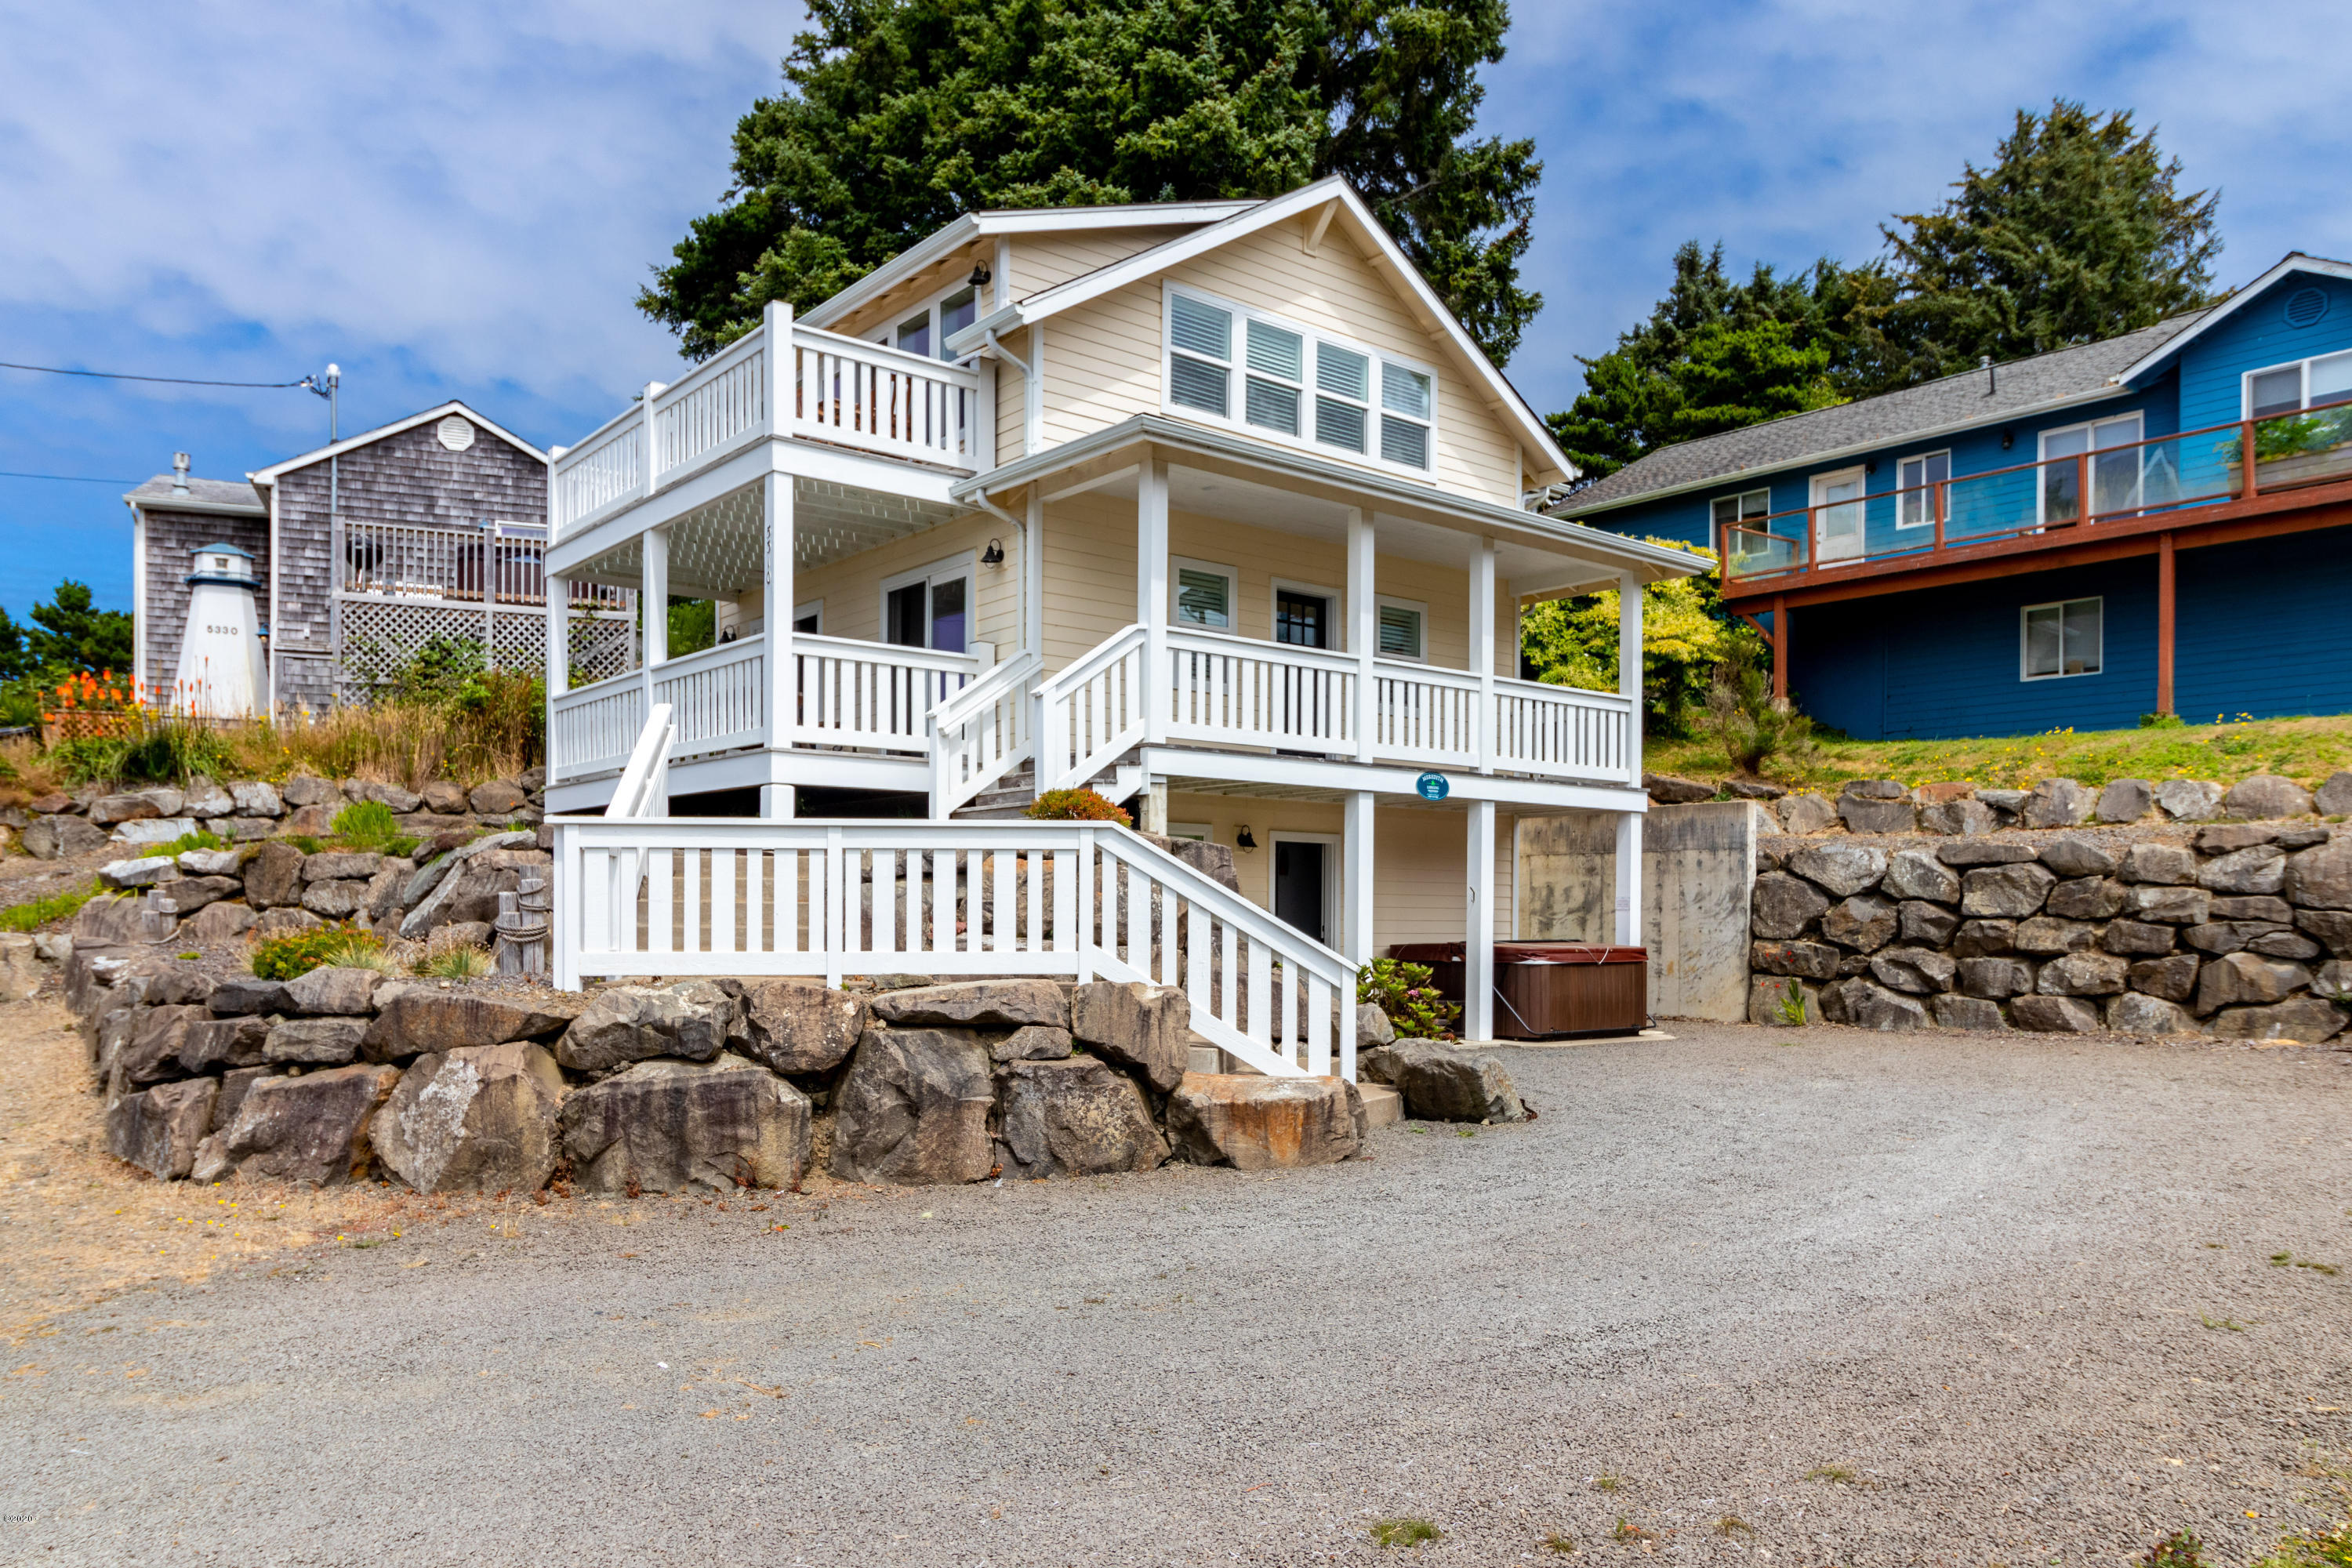 5310 NE Neptune's Ln Depoe Bay, Gleneden Beach, Lincoln City, Newport, Otis, Rose Lodge, Seal Rock, Waldport, Yachats, To Home Listings - Amy Plechaty, Emerald Coast Realty Real Estate, homes for sale, property for sale